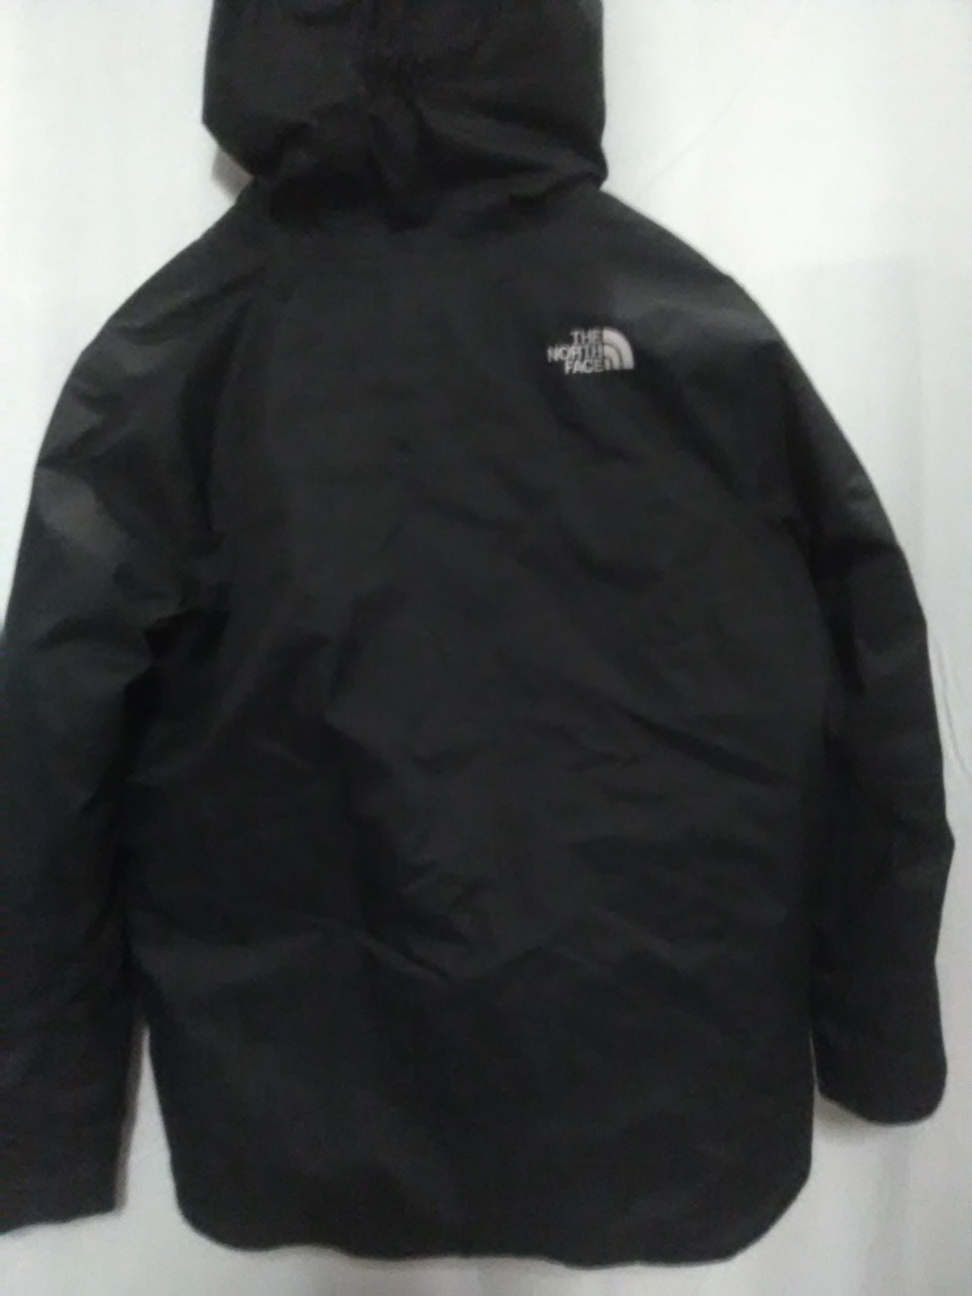 Black Used Boys XL The North Face Jacket